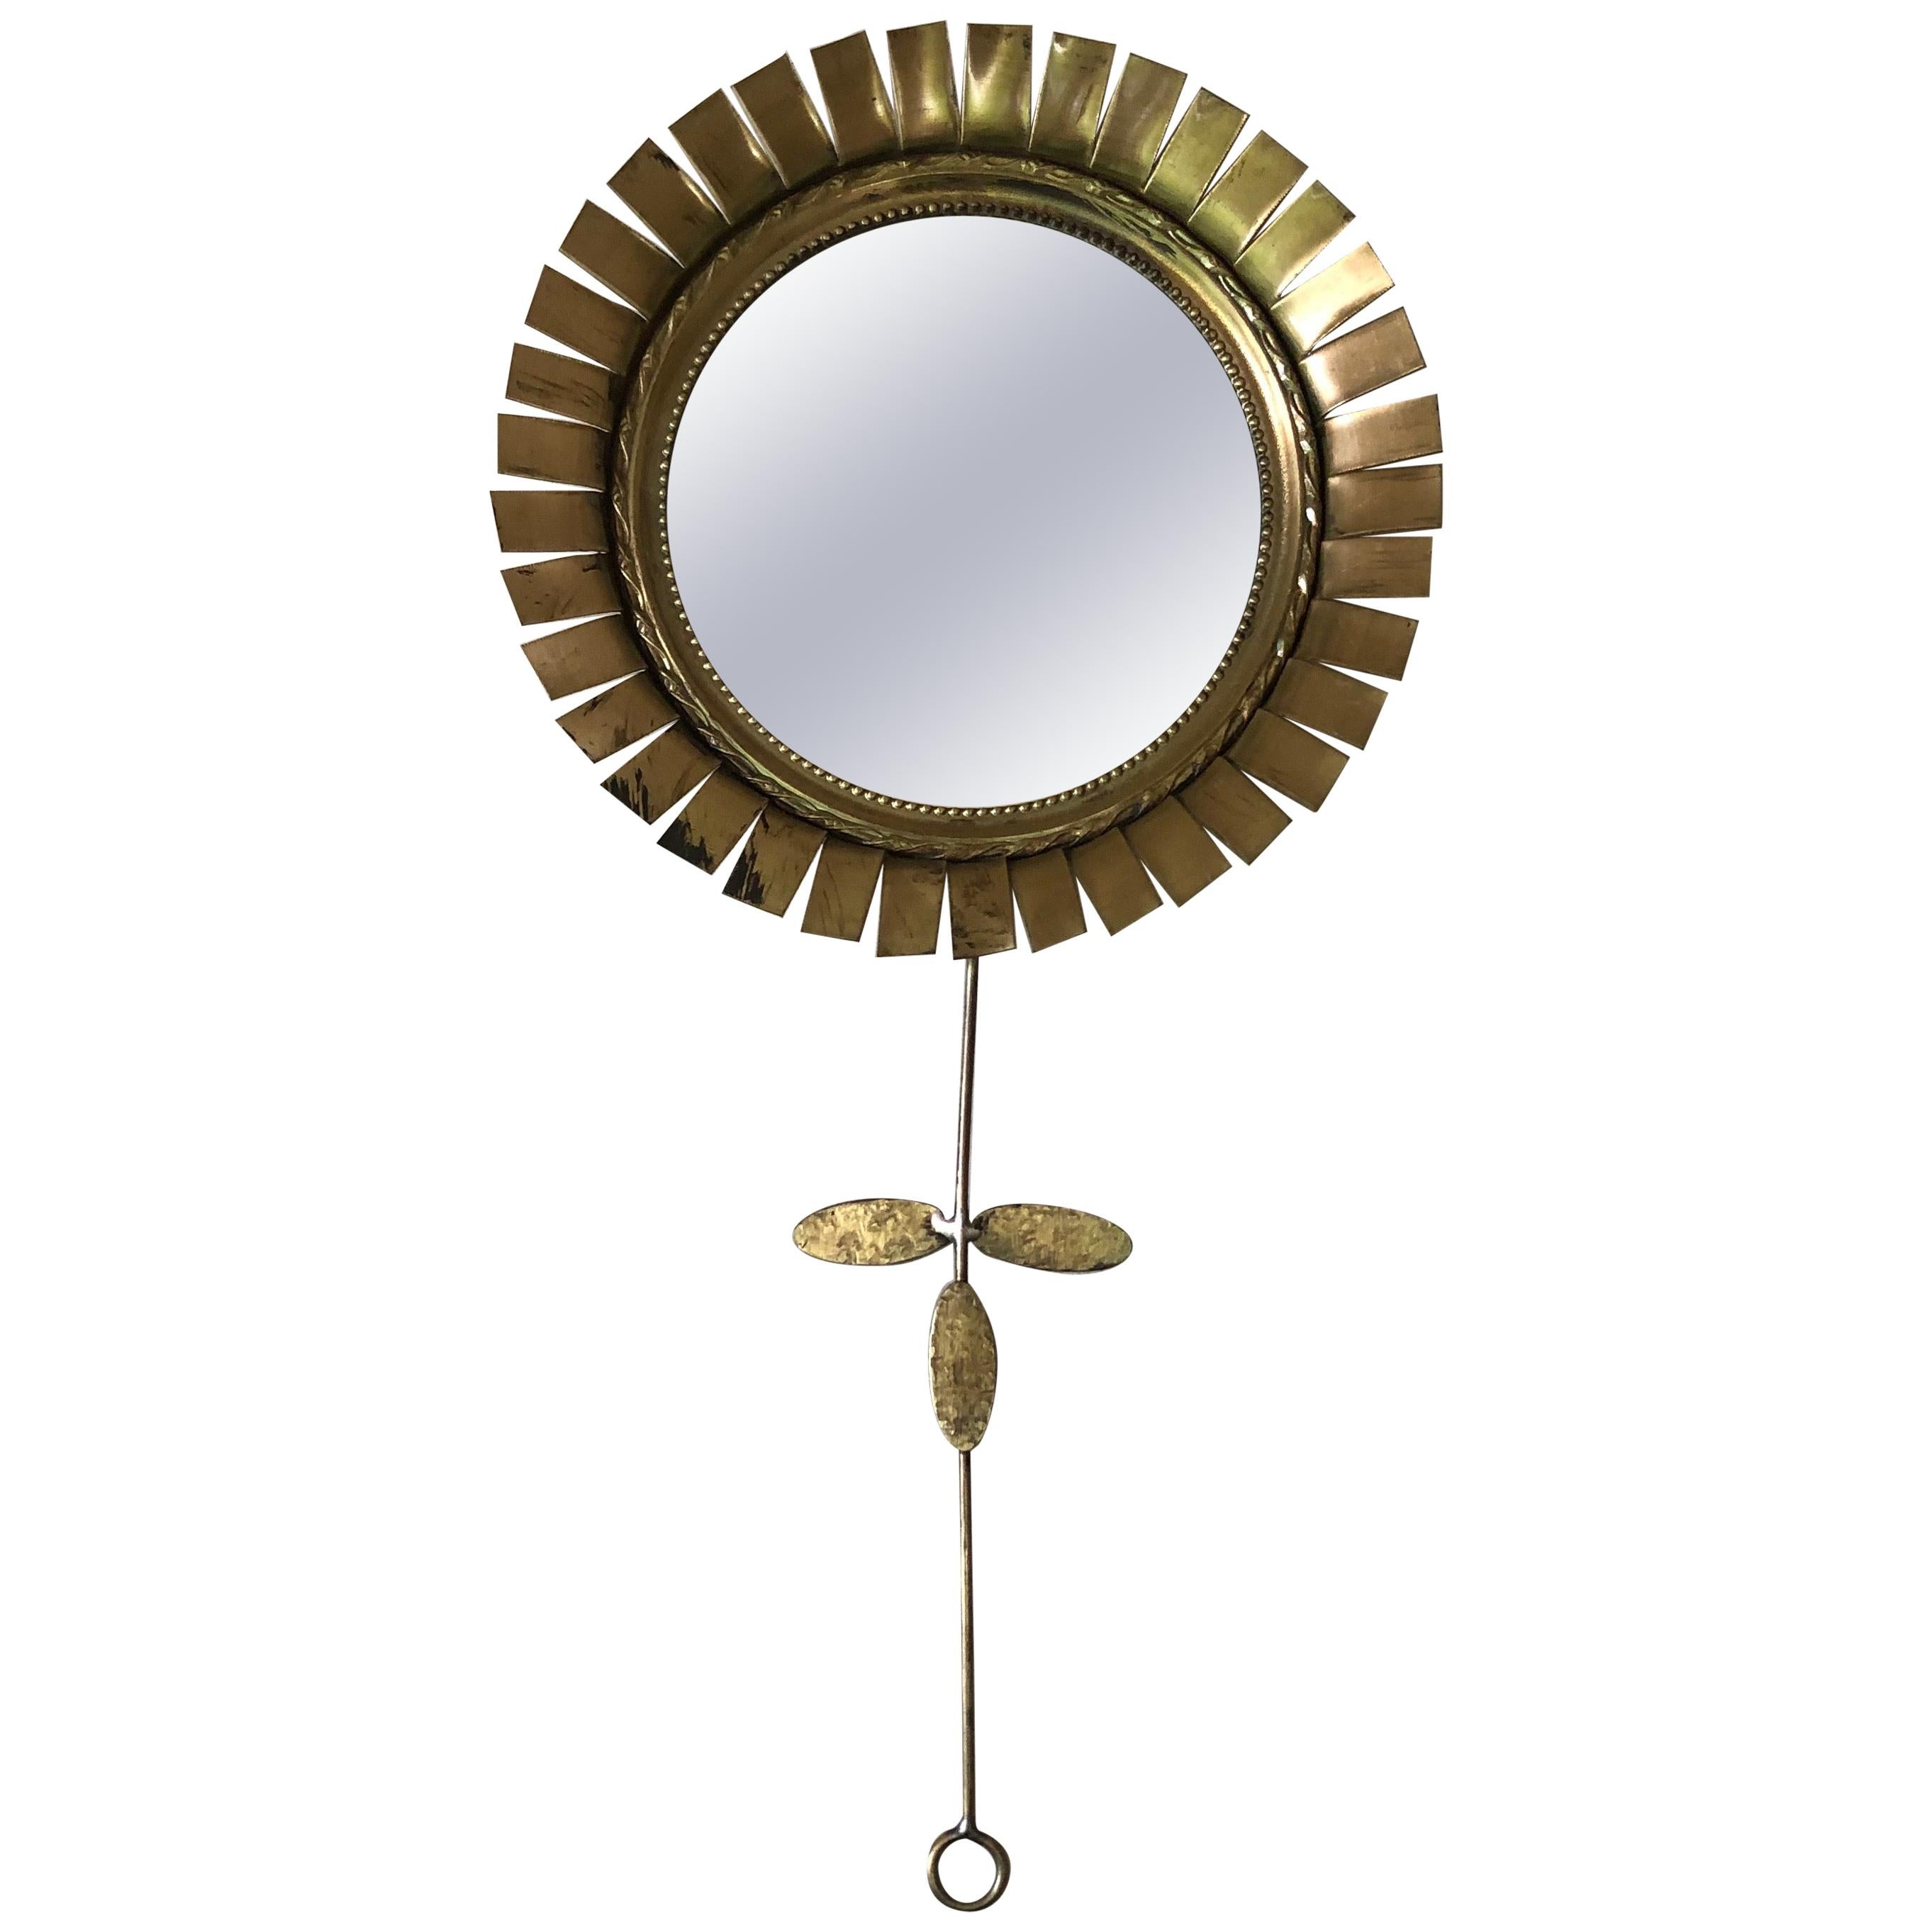 Small French Gold Metal Flower Mirror, circa 1960